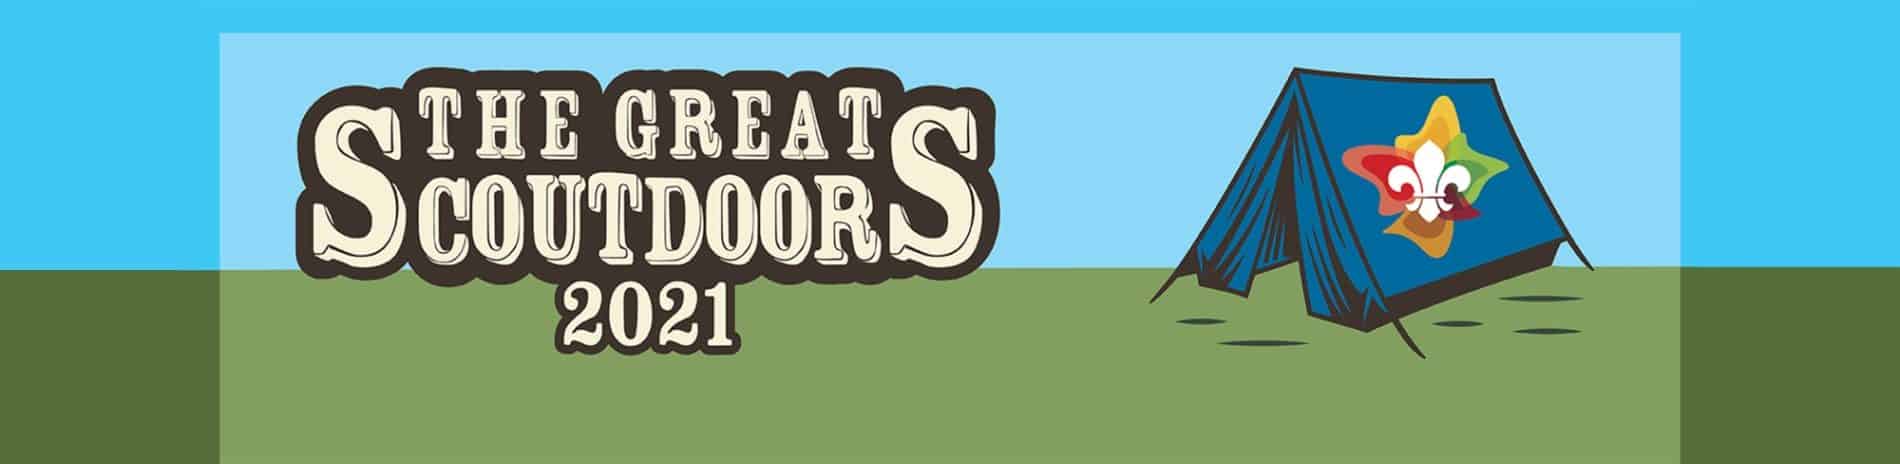 The Great Scoutdoors Banner